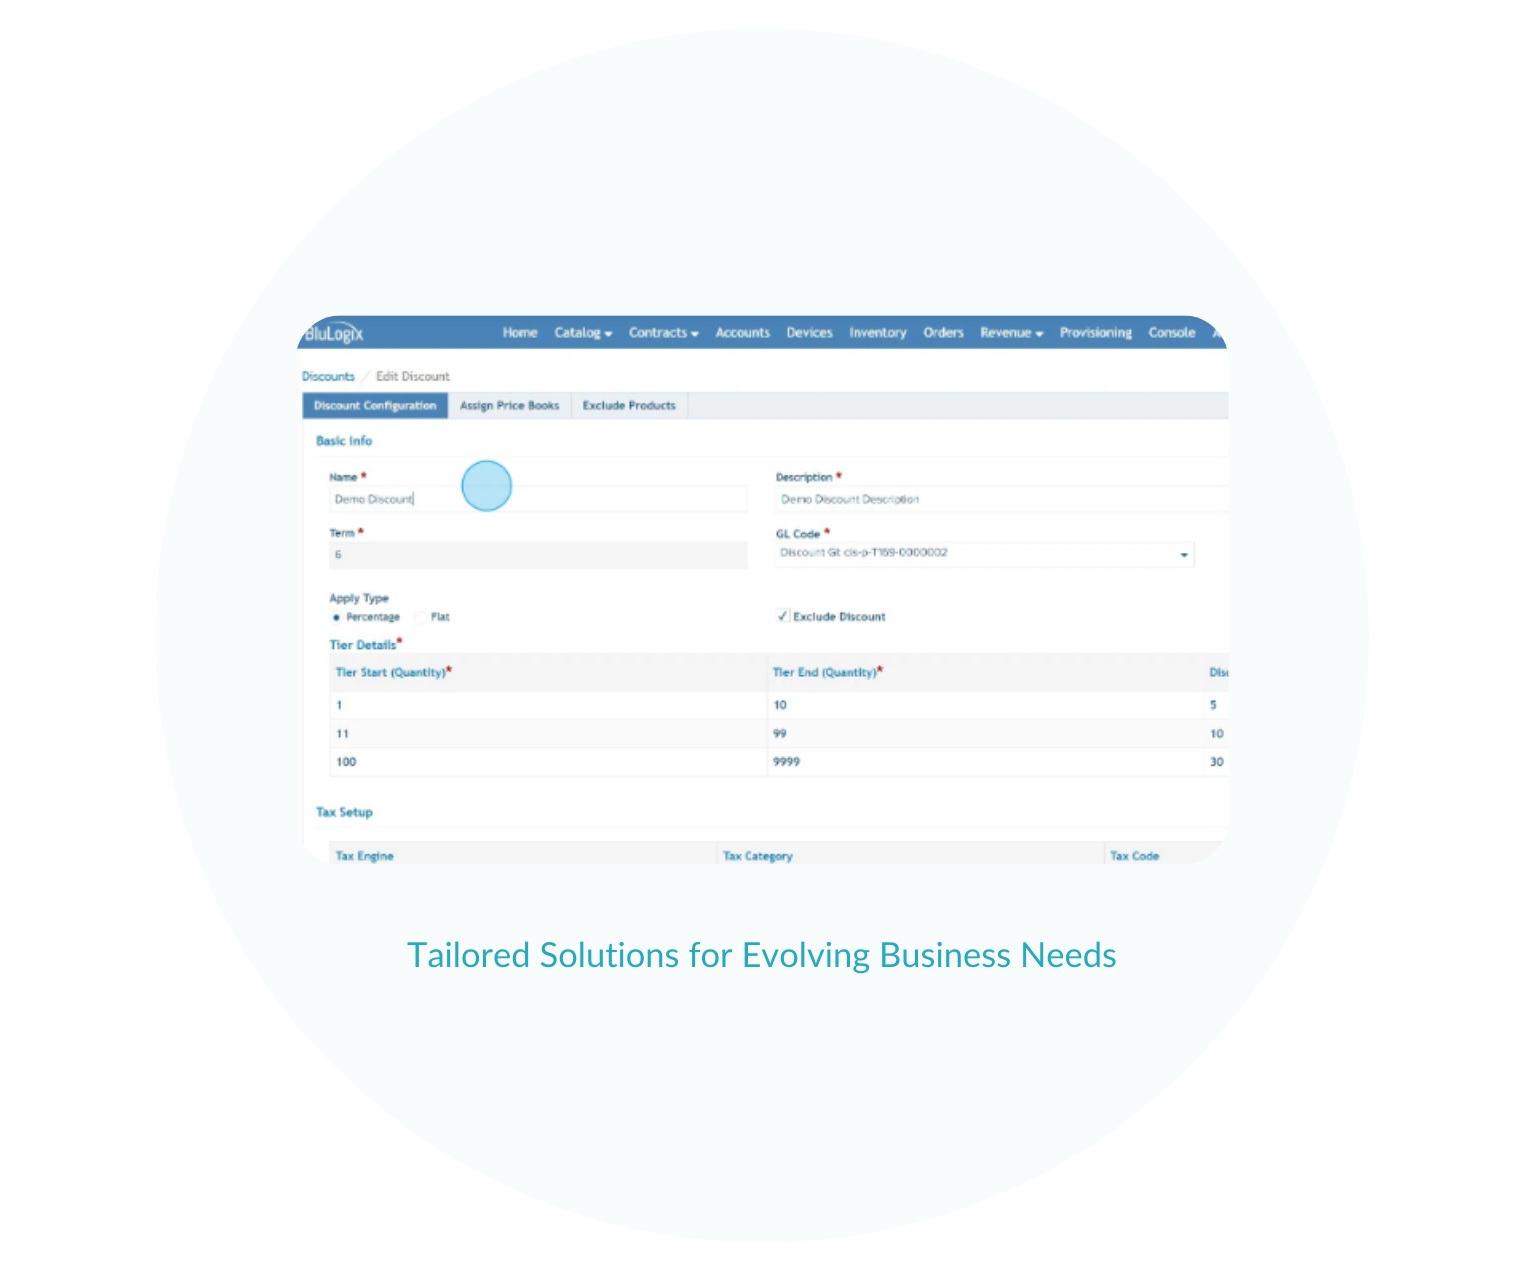 Tailored Solutions for Evolving Business Needs